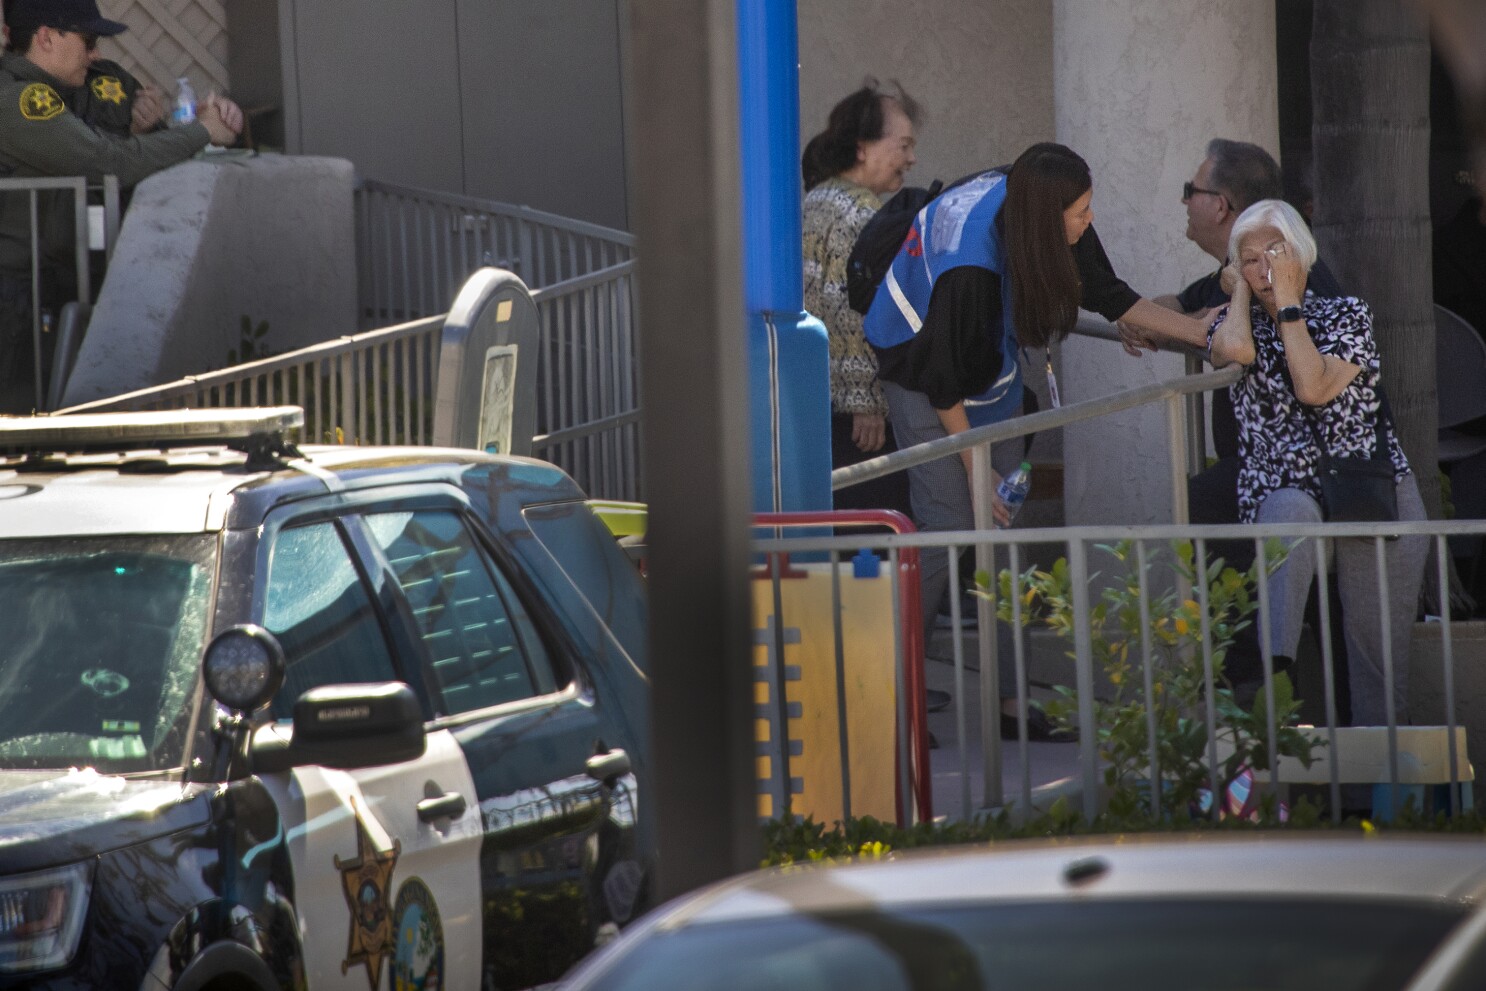 Laguna Woods Church Shooting: Who Is David Chou? Suspect Nationality And Ethnicity